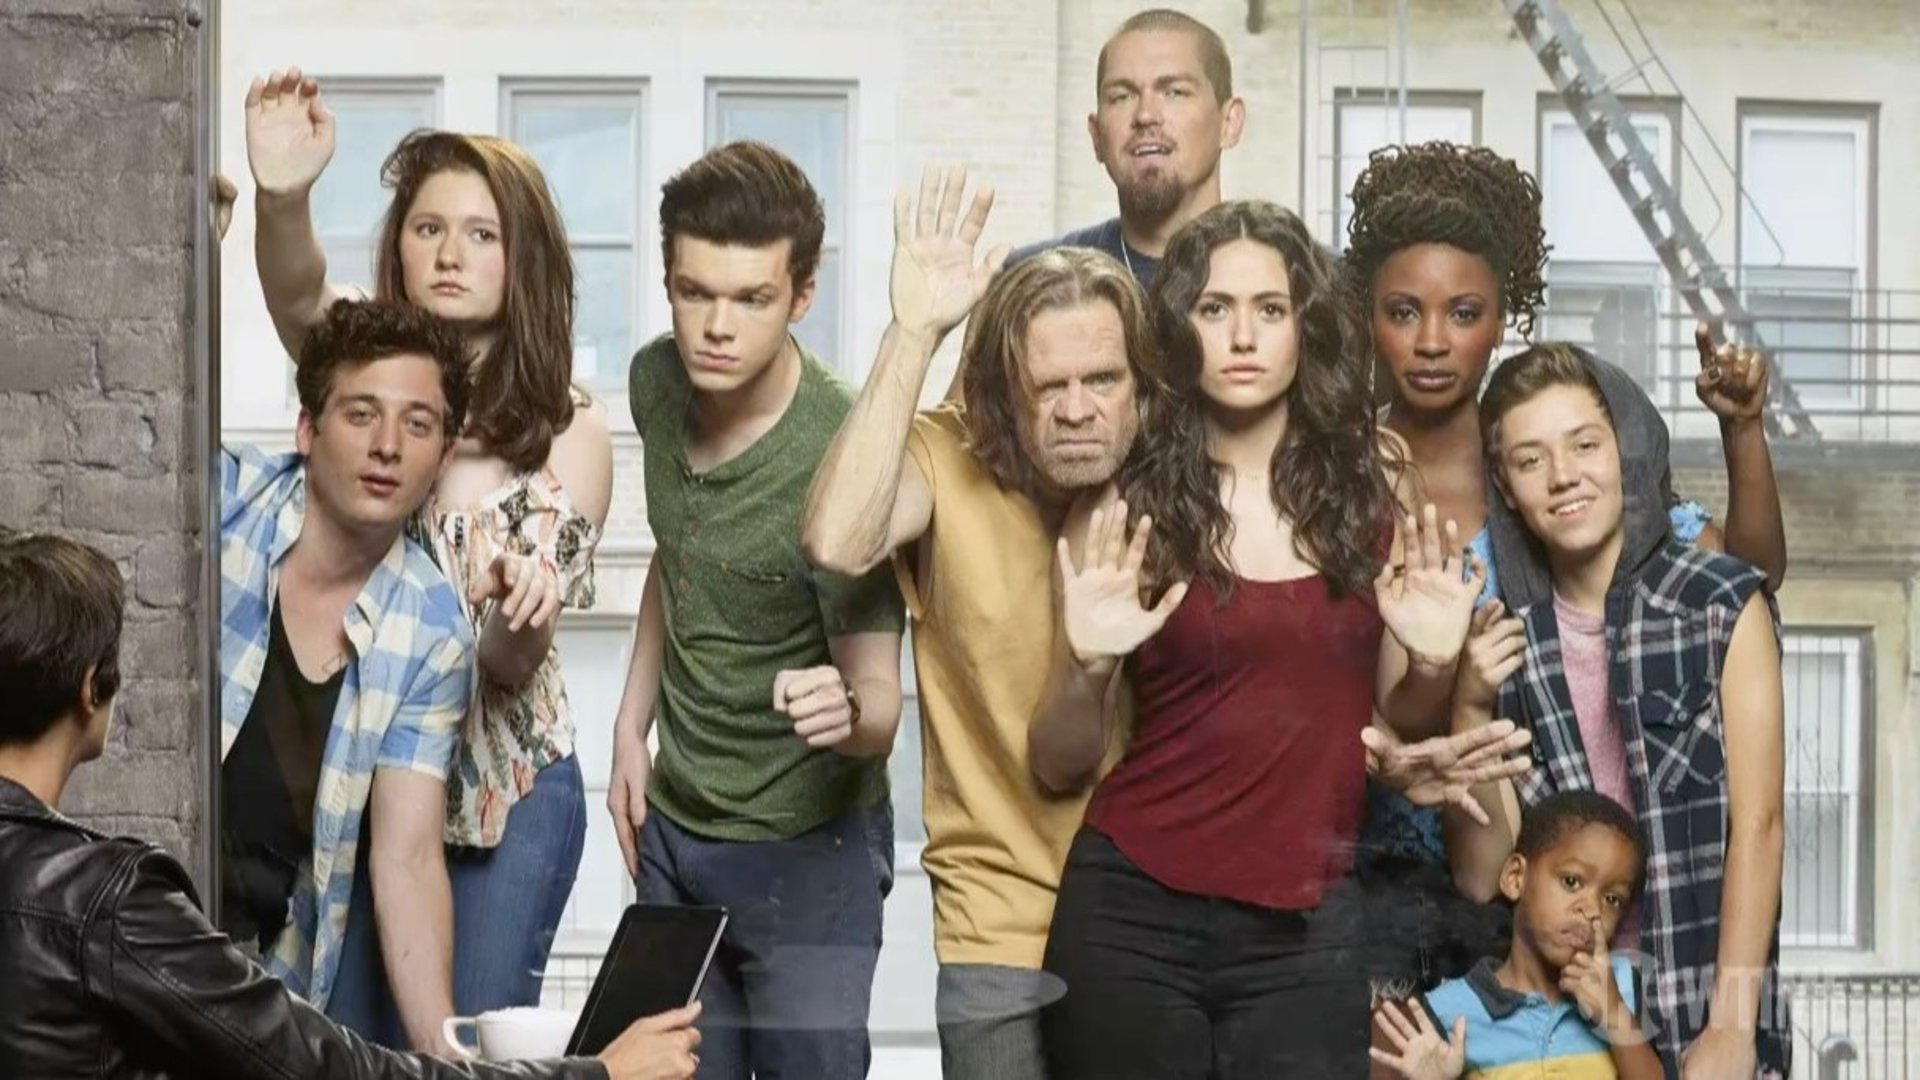 Rumors are flying about what’s going to happen in Shameless season 8! Check out my predictions for the Gallaghers and see if you agree!